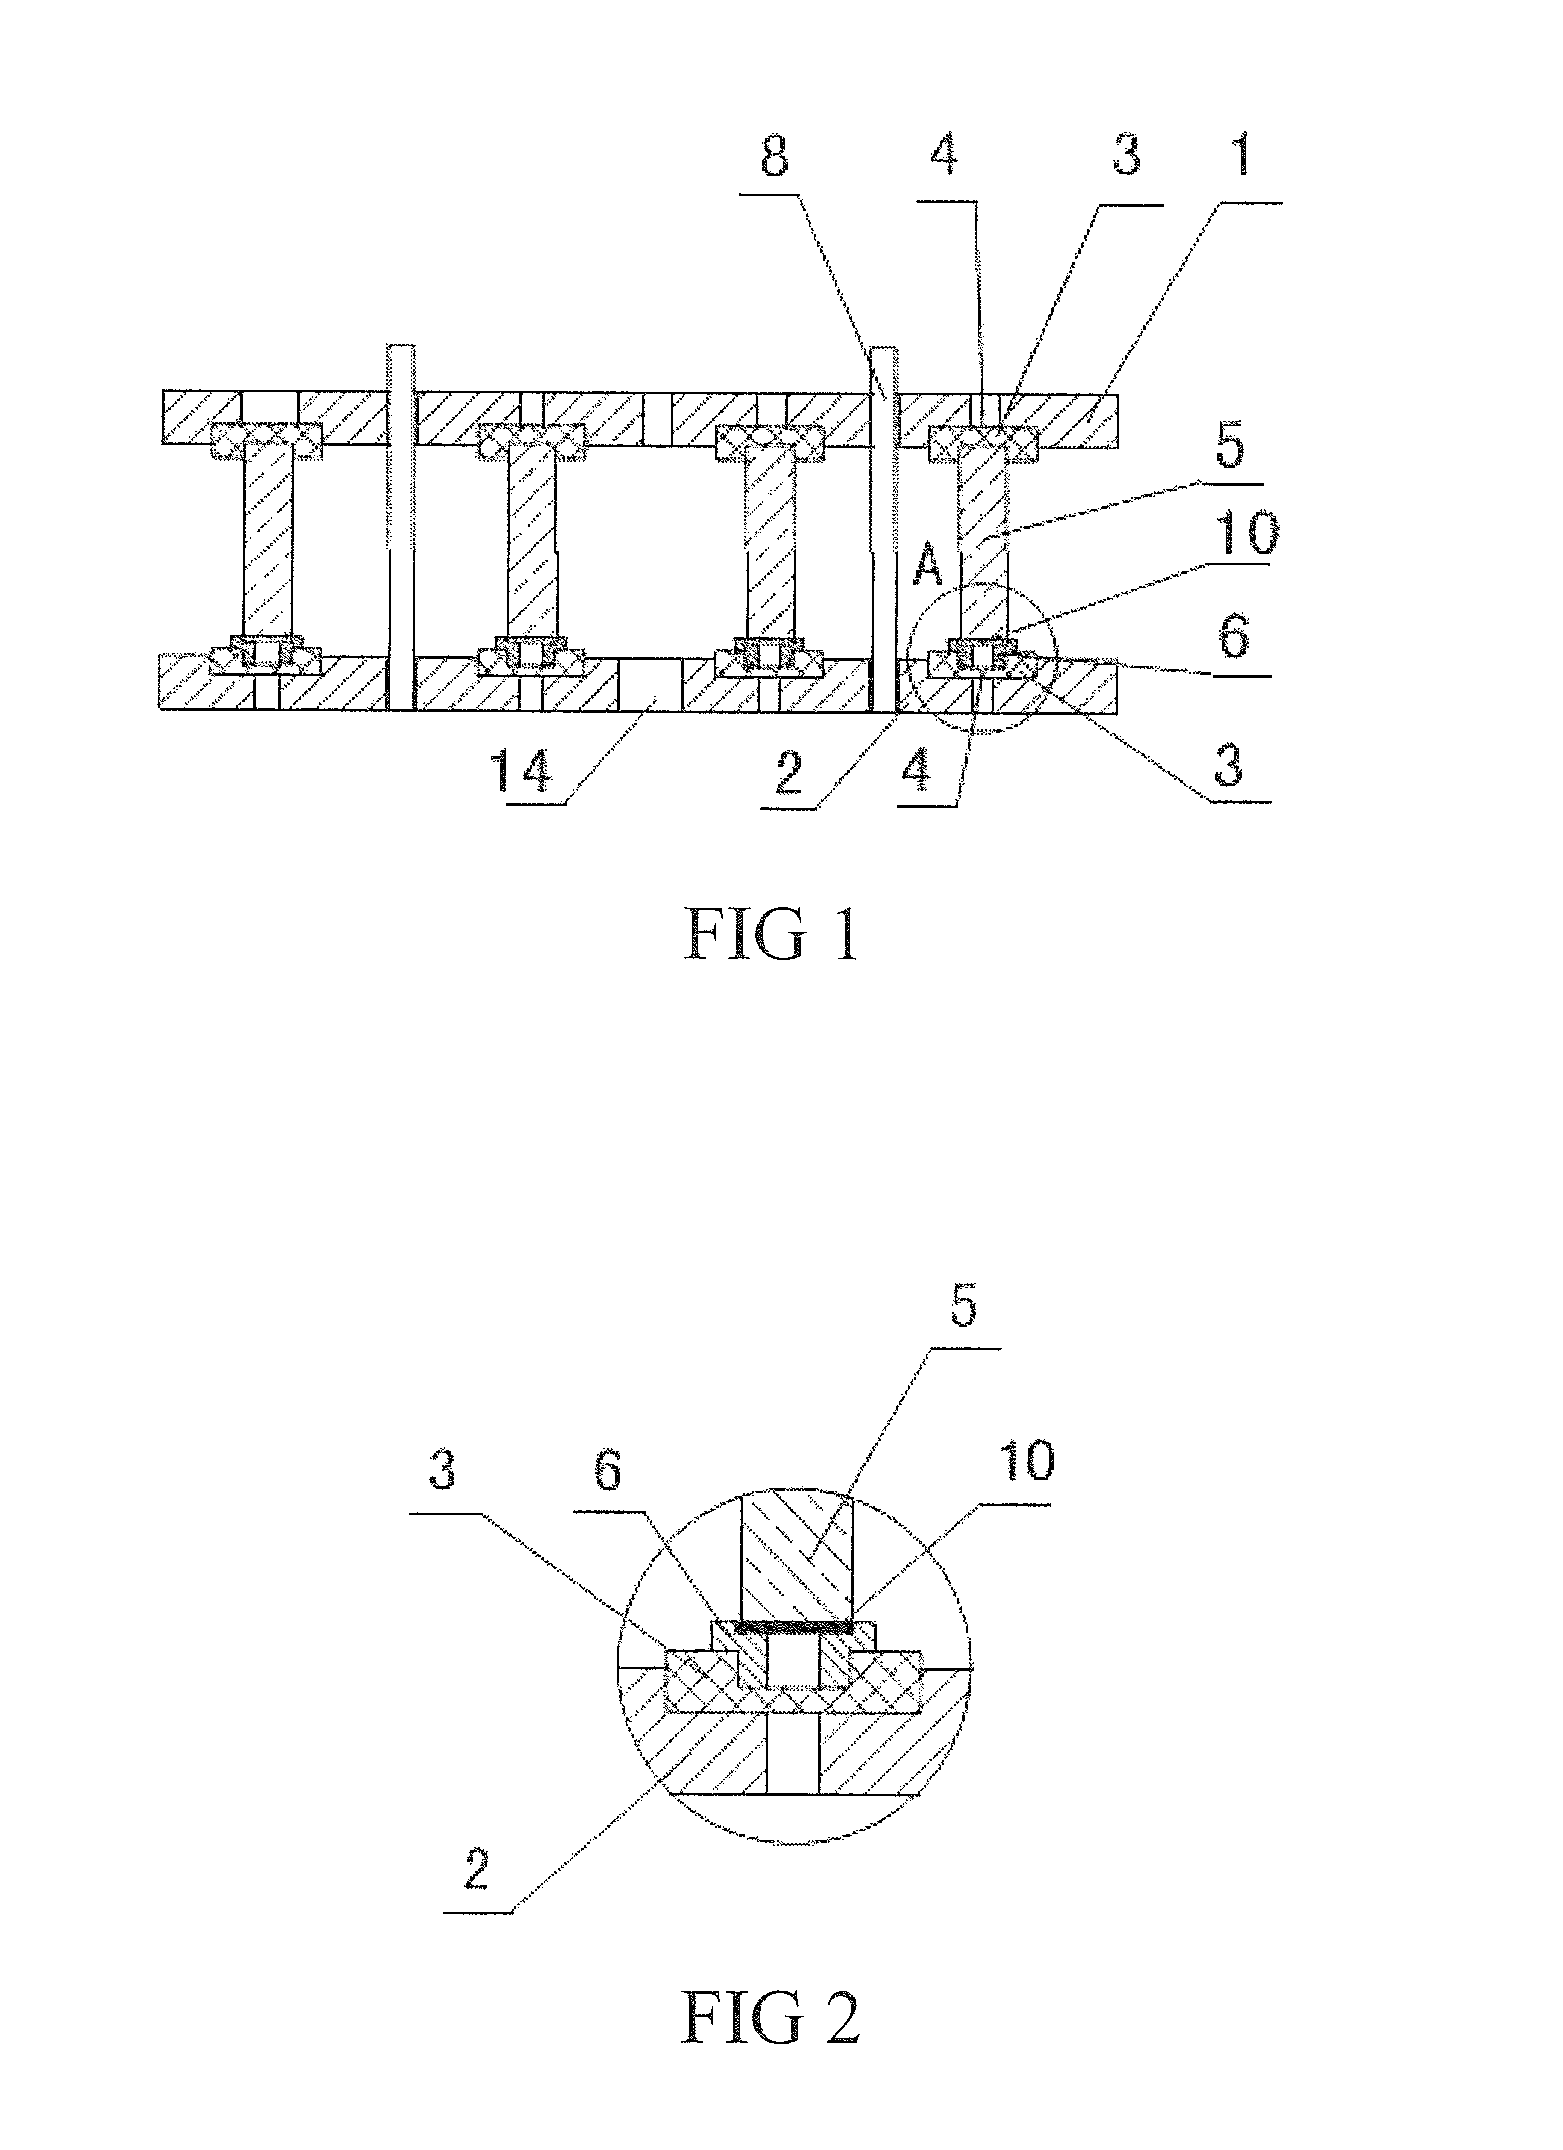 Method for Reliably Soldering Microwave Dielectric Ceramics with Metal